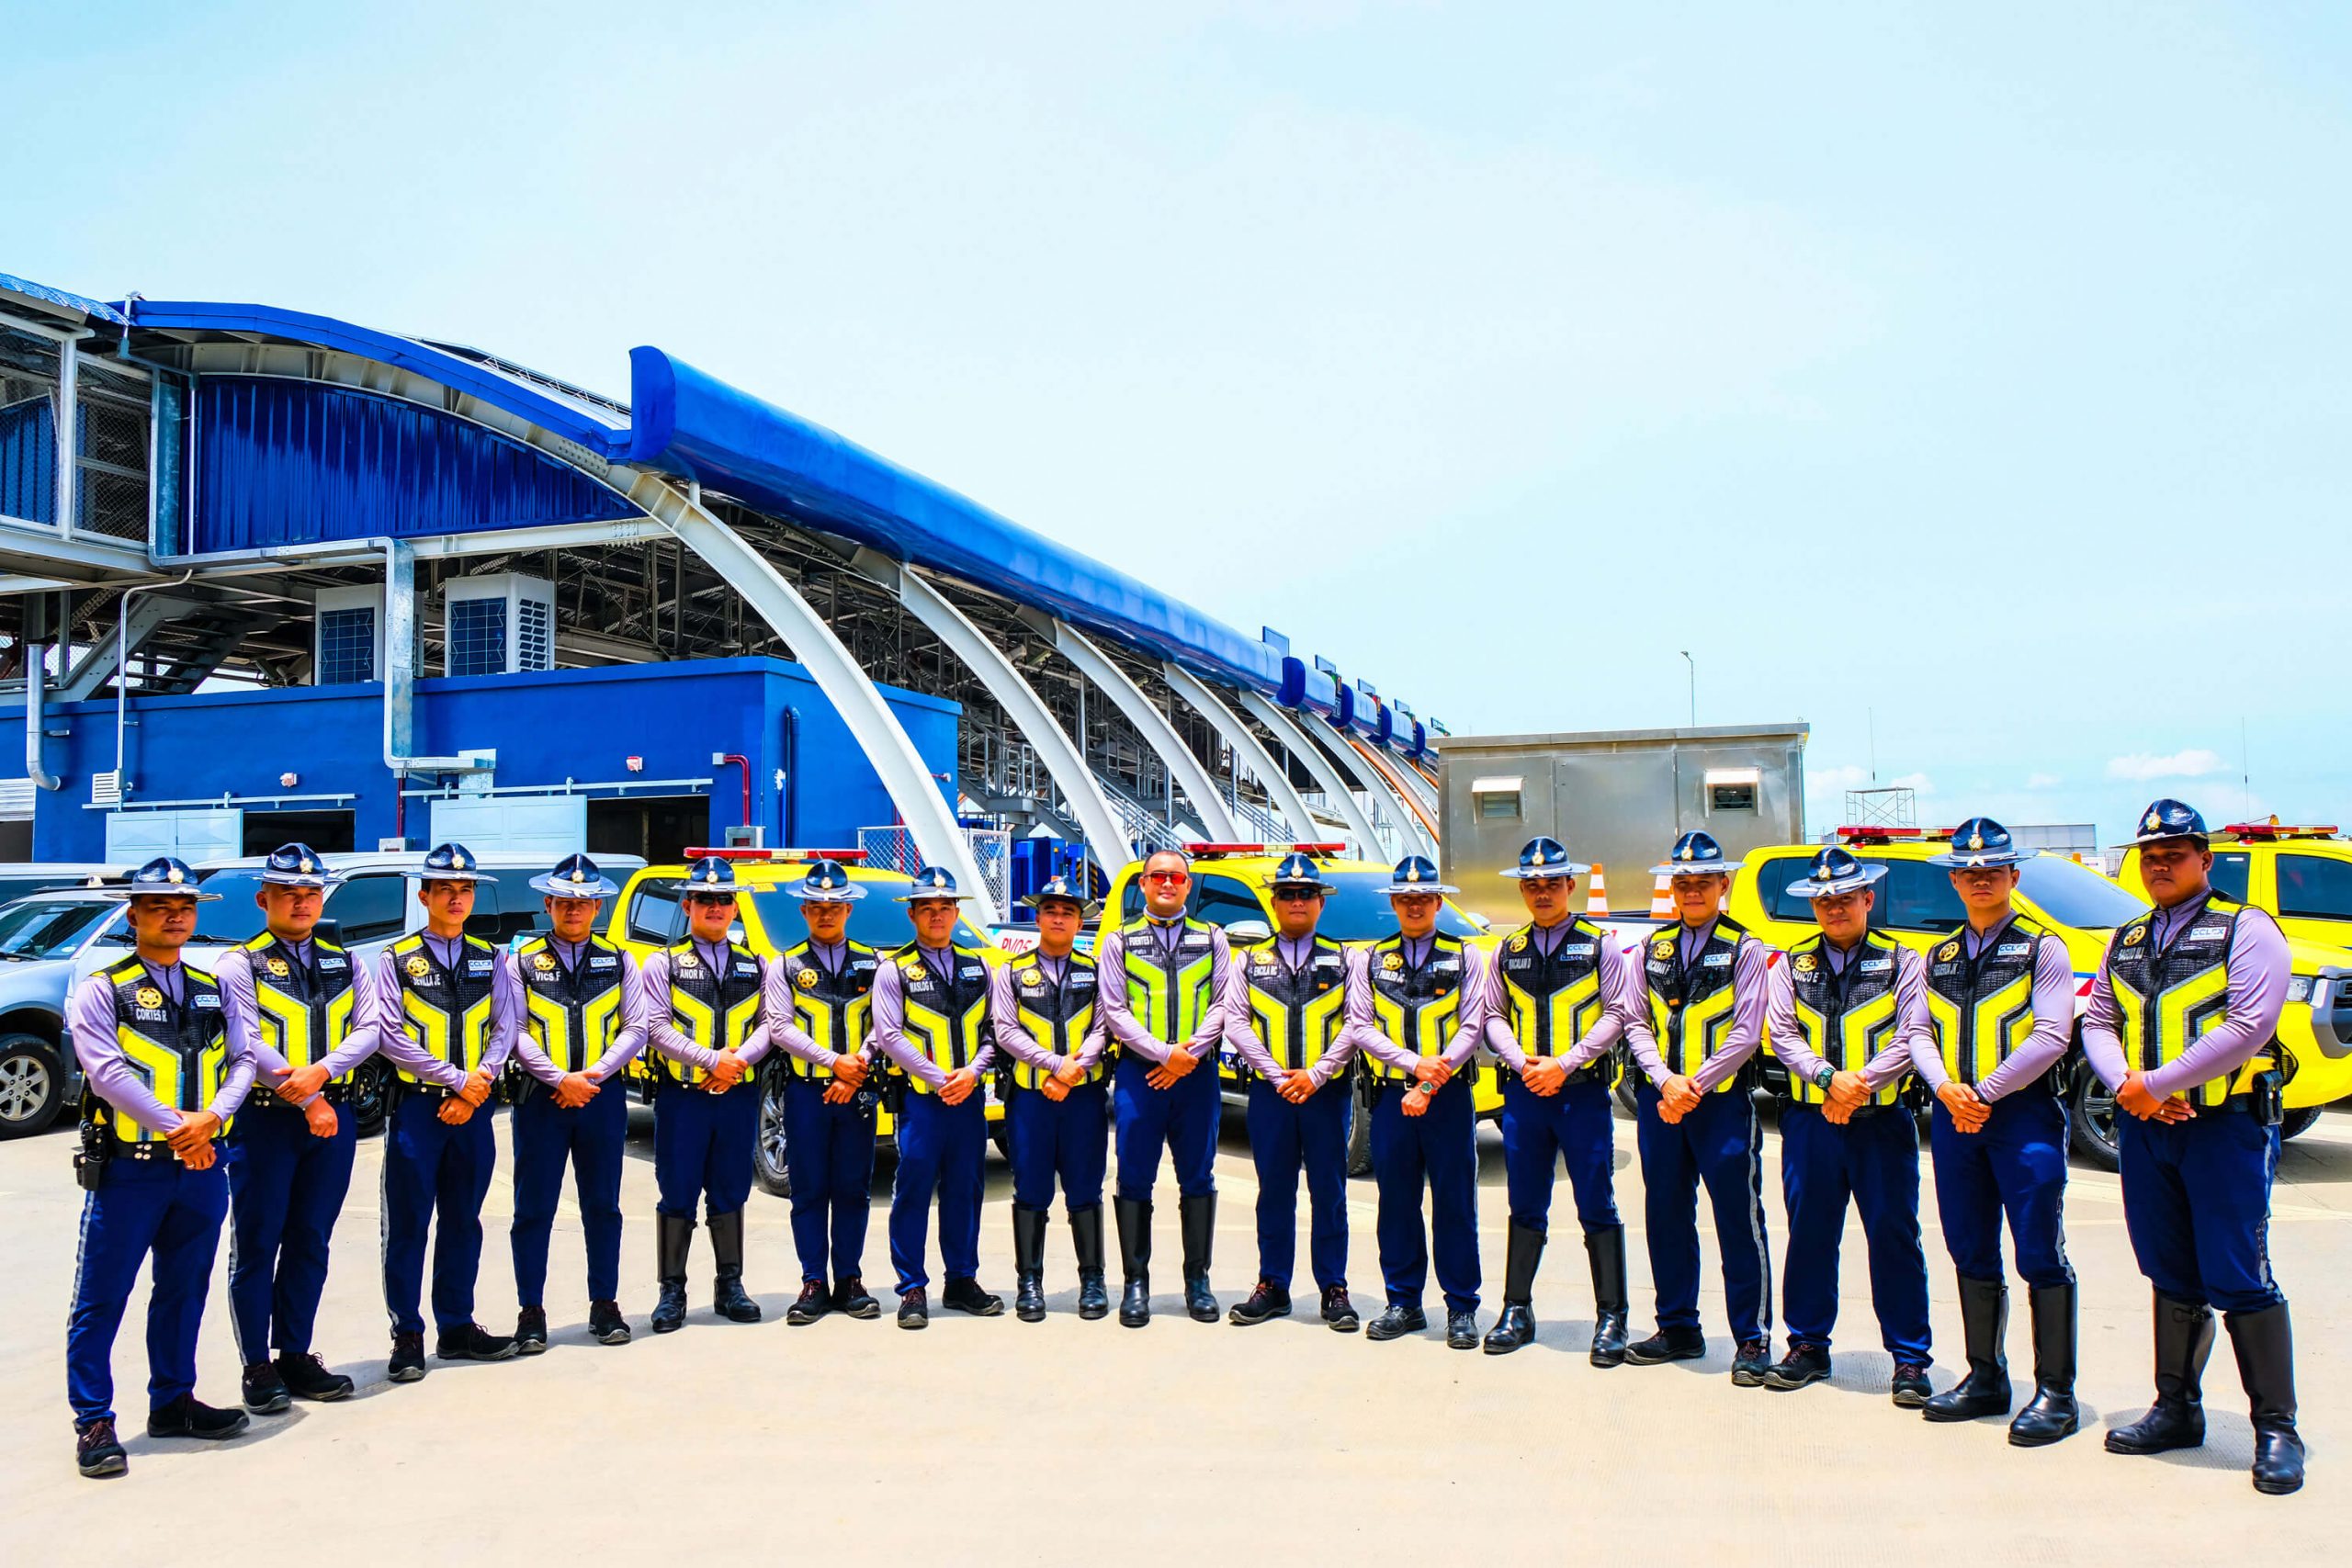 The 16 newly deputized patrol crew members of the Cebu-Cordova Link Expressway (CCLEX), who man the 8.9-kilometer expressway 24 hours a day, seven days a week.